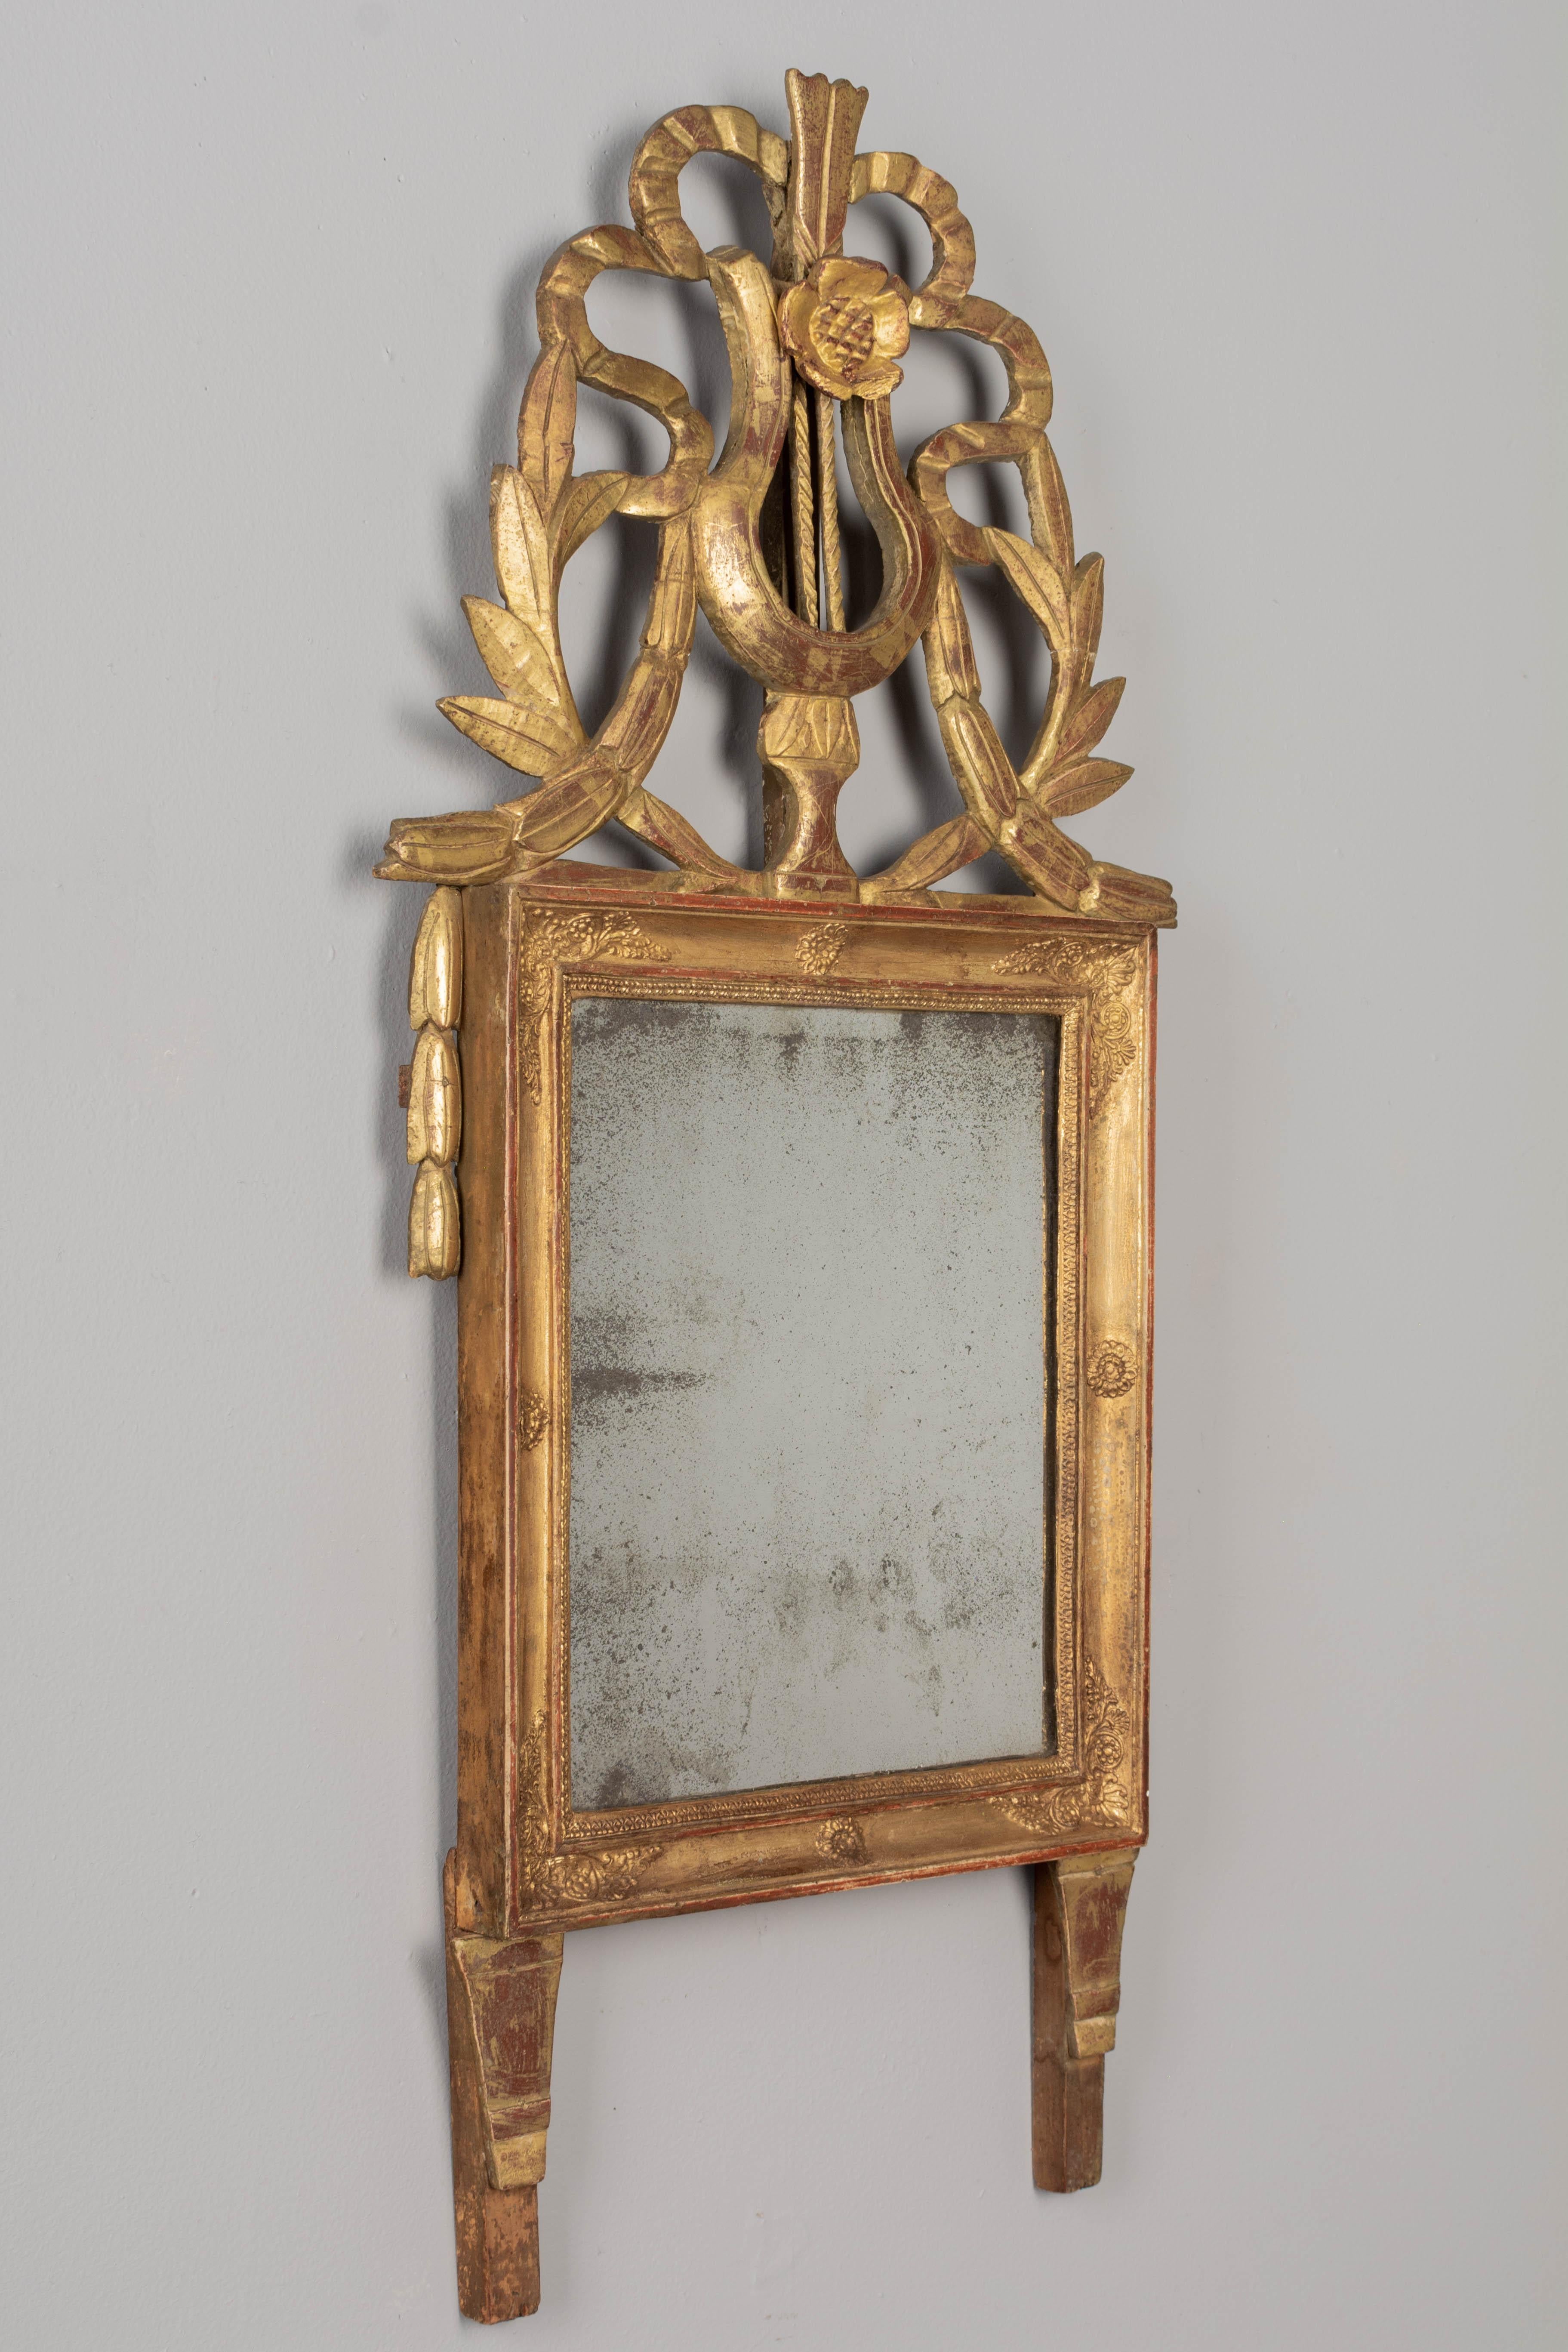 19th Century French Louis XVI Style Giltwood Mirror In Good Condition For Sale In Winter Park, FL